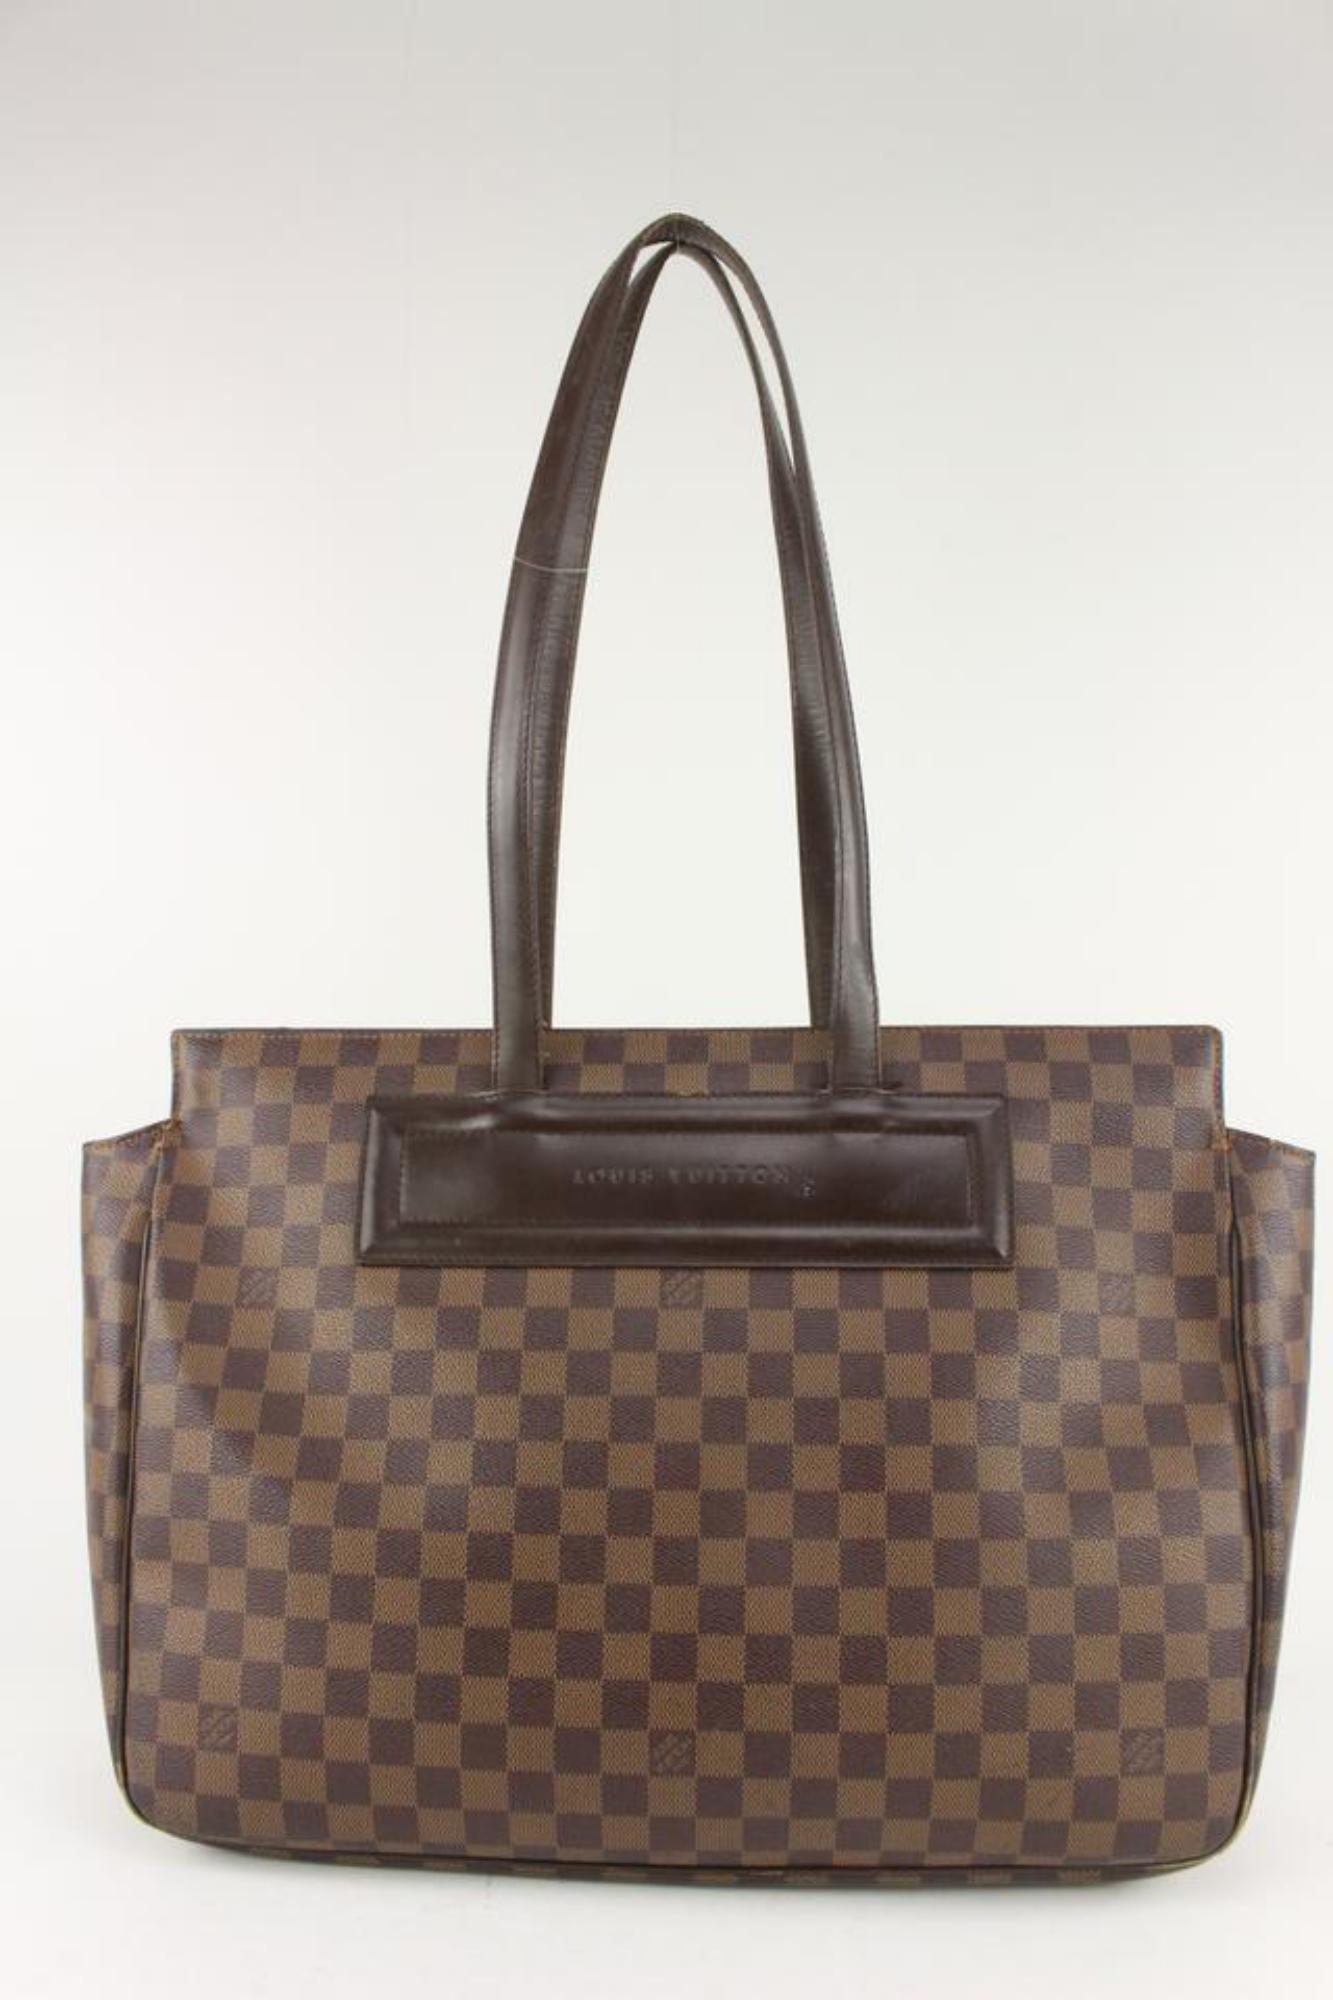 Louis Vuitton Damier Ebene Parioli Tote bag s127LV0 In Good Condition For Sale In Dix hills, NY